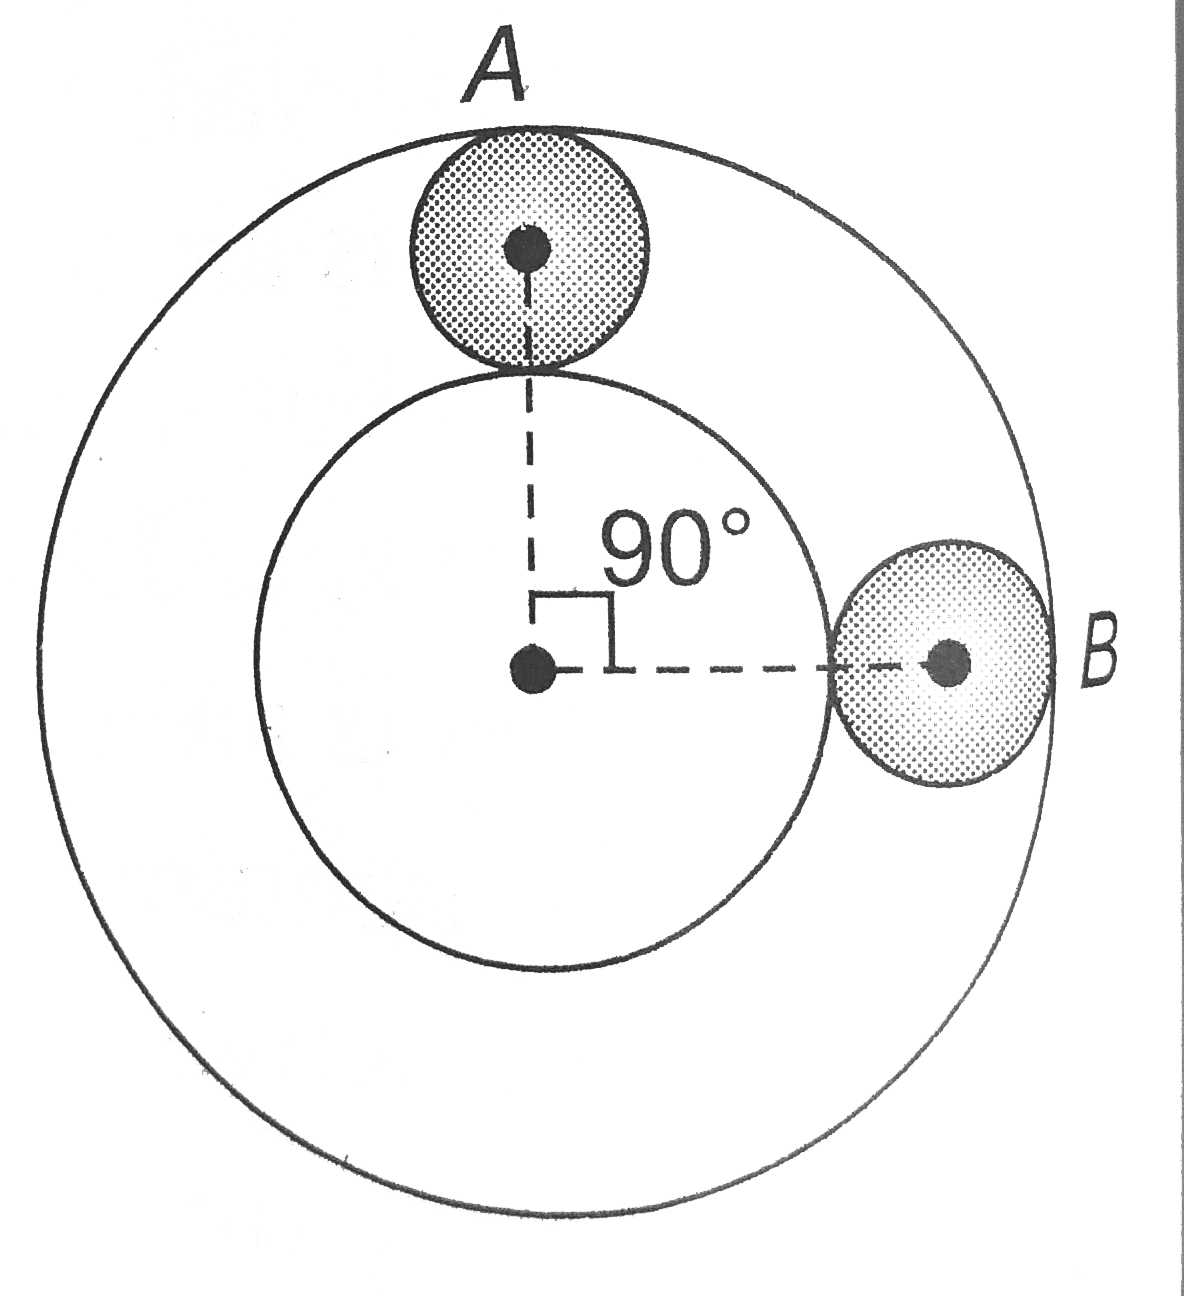 Body A of mass m and B of mass 3m move towards each other with velocities V and 2 V respectivally from the positions as shown , along a smooth horizontal circule track of redius r. After the first elastic collision , they will collide again after the time: